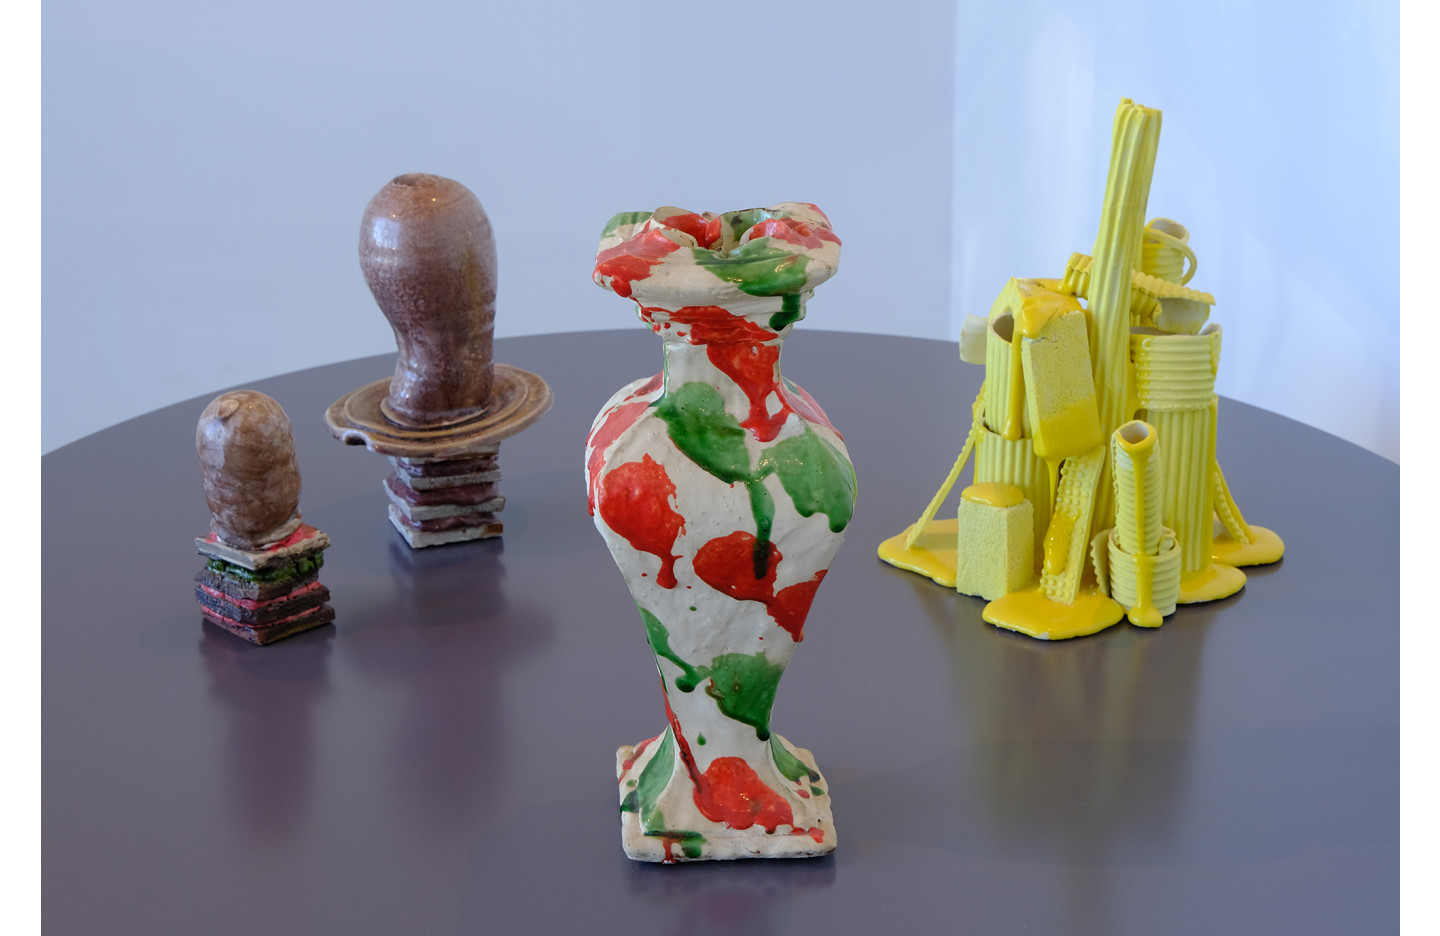 What Do Ceramics Want?, Ramp Gallery (2021)